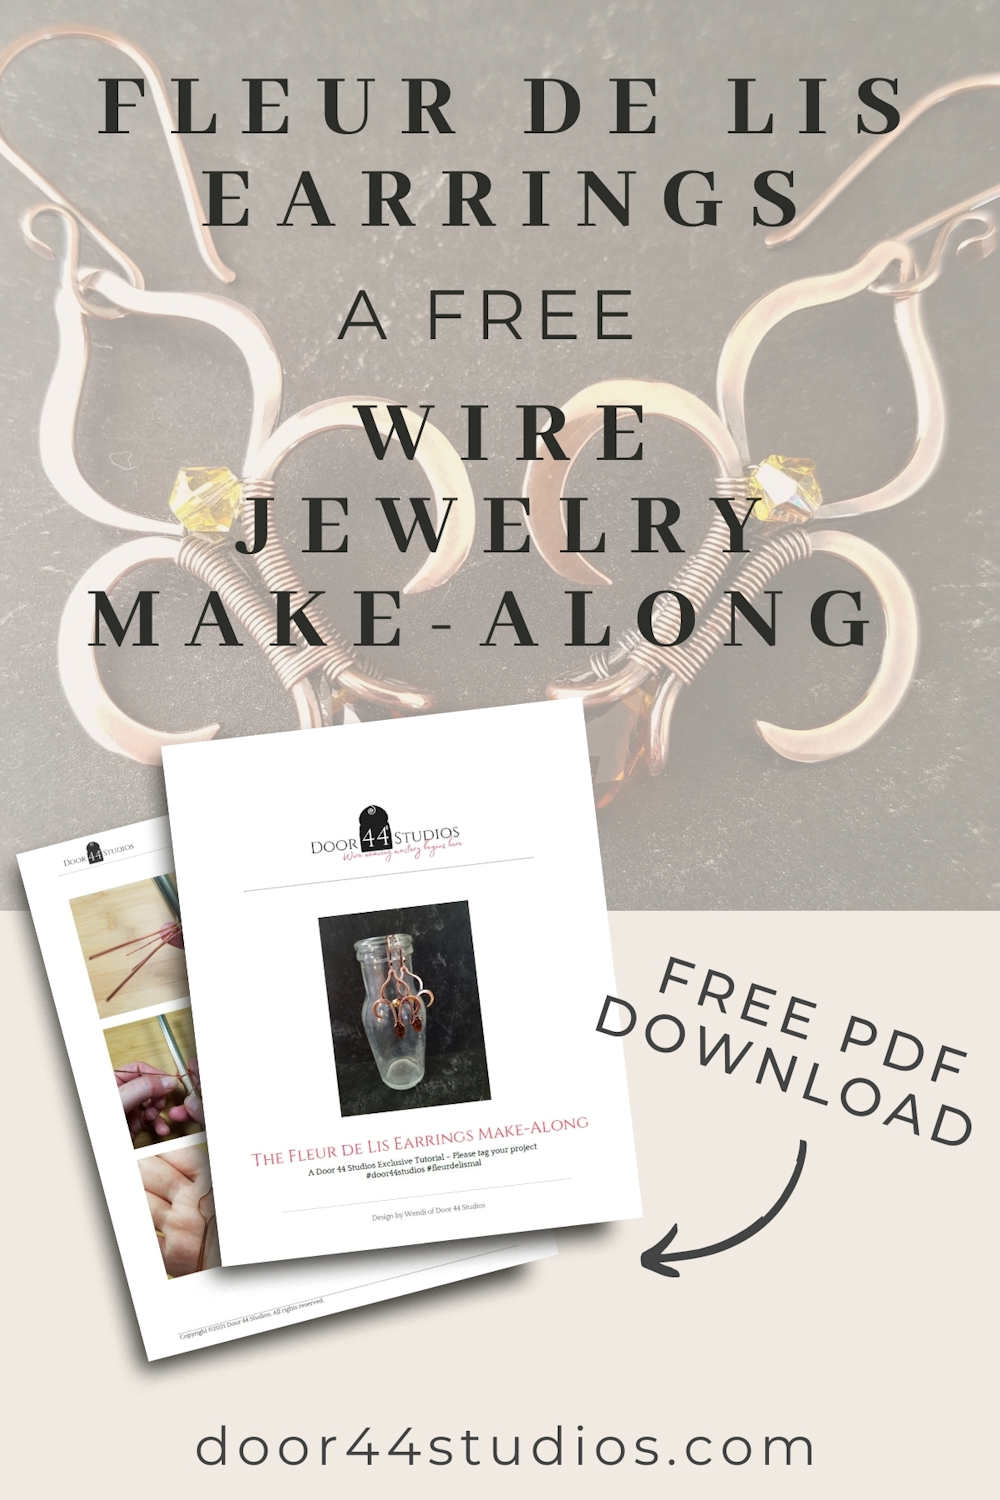 Learn to make the Fleur-de-Lis earrings with this video-guided wire jewelry make-along, which includes a free downloadable PDF tutorial.